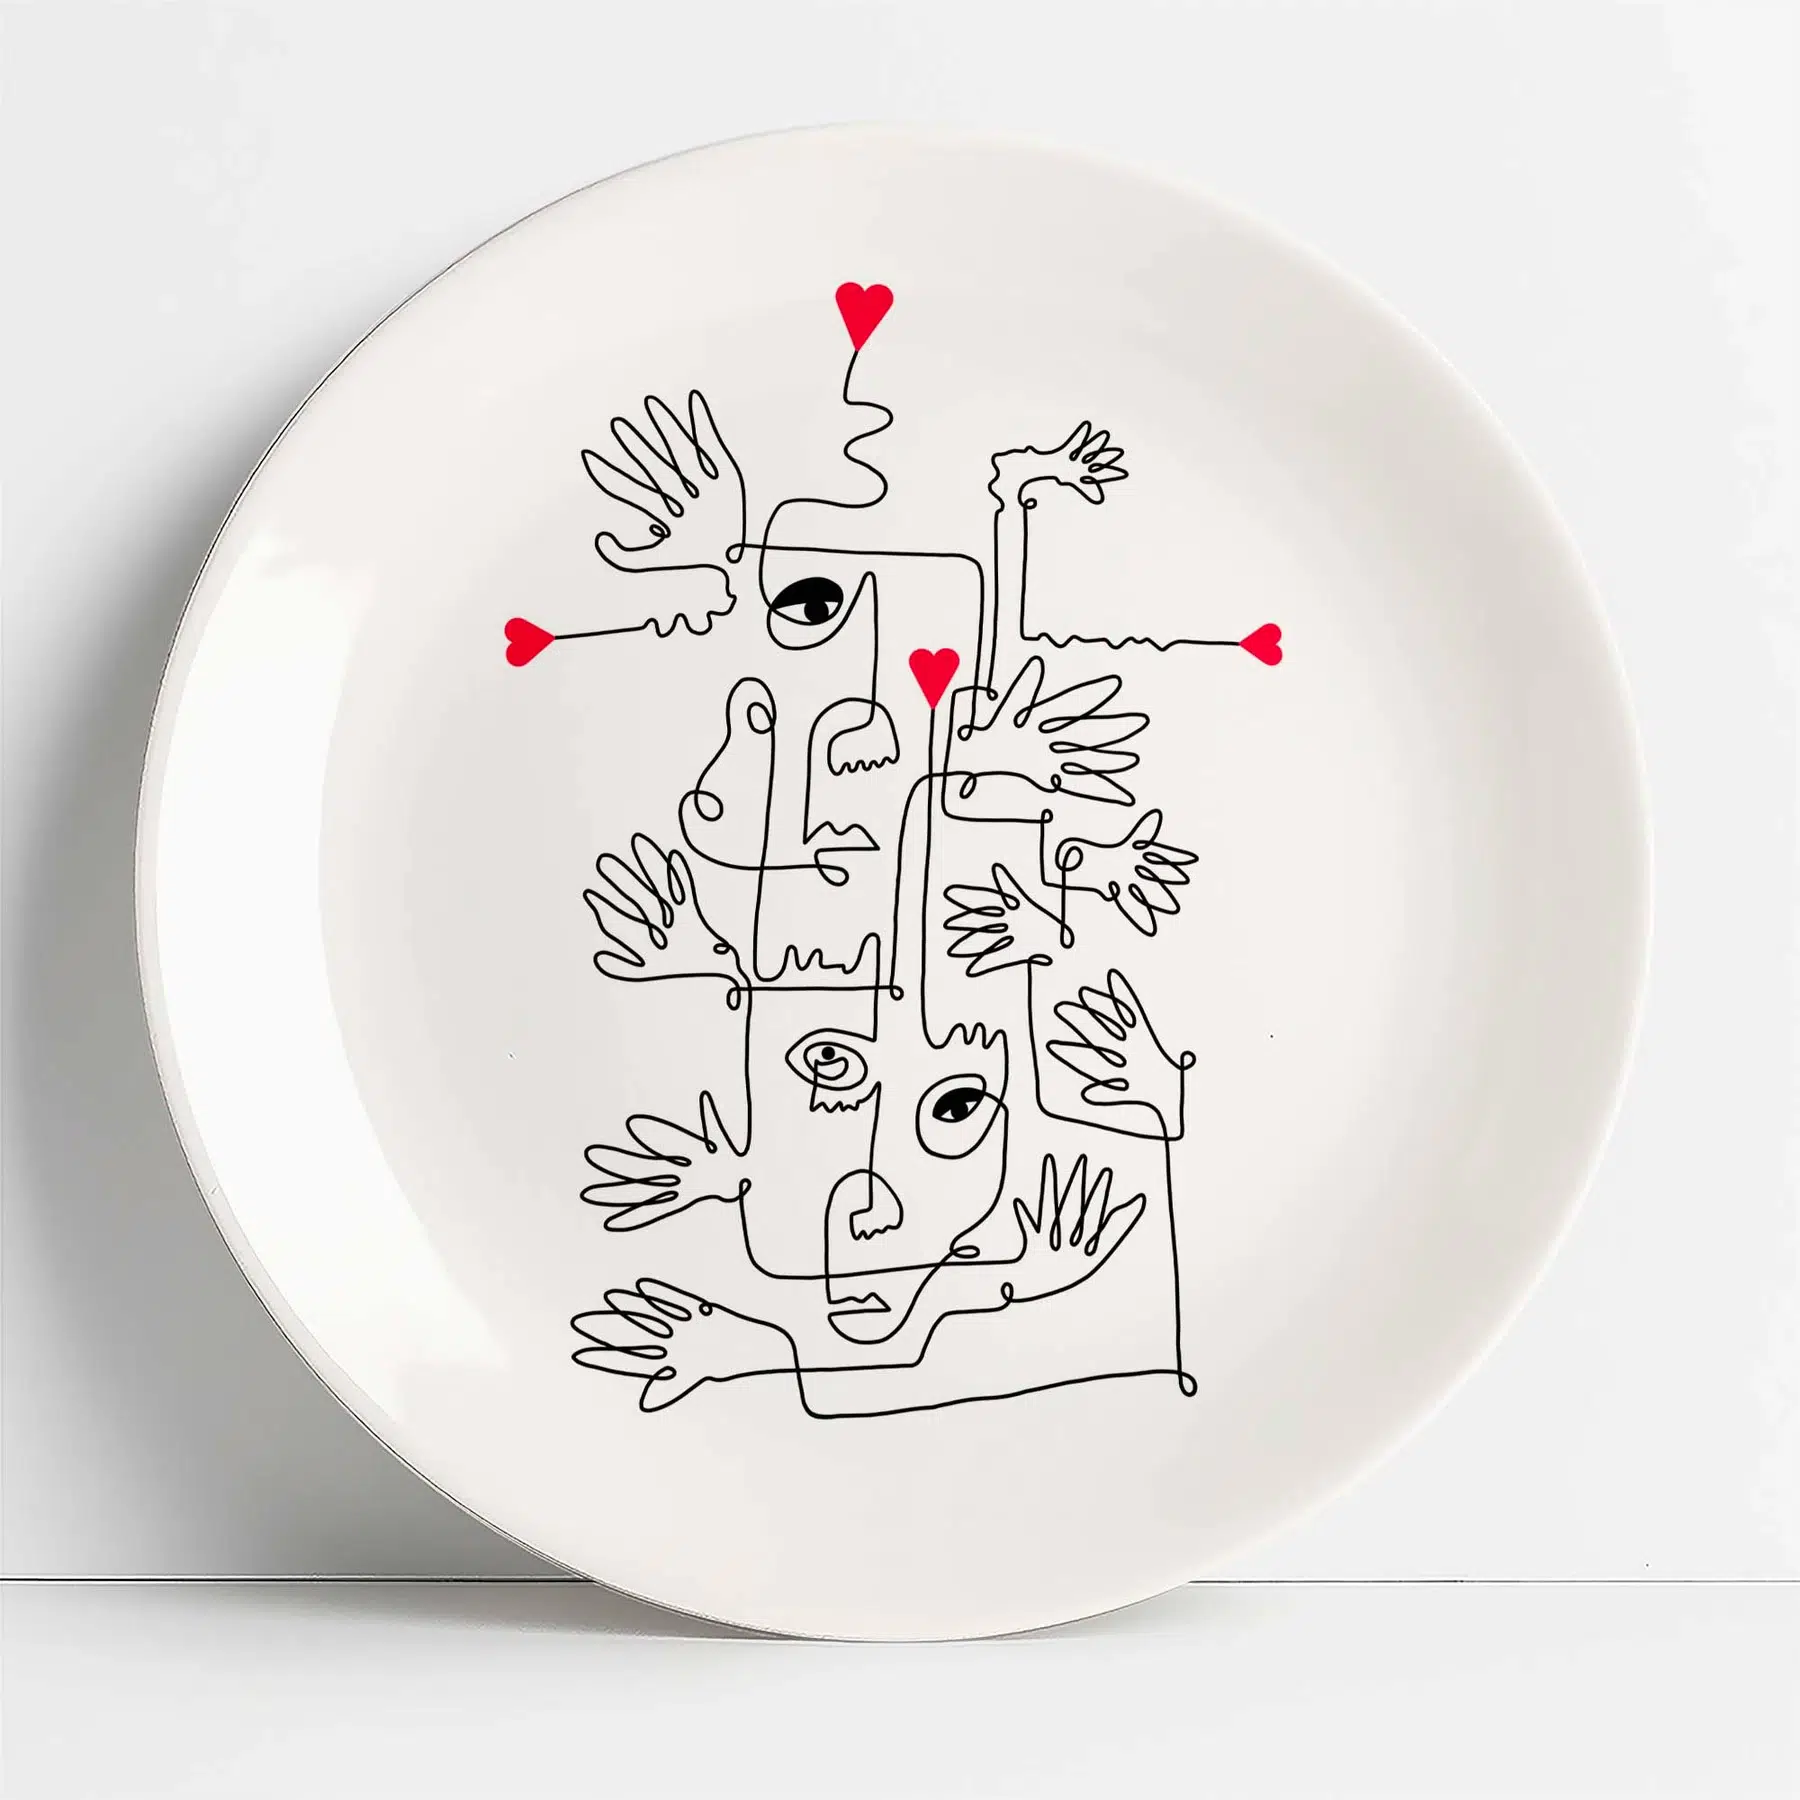 “Linked” by Jinkal Patel the plate project